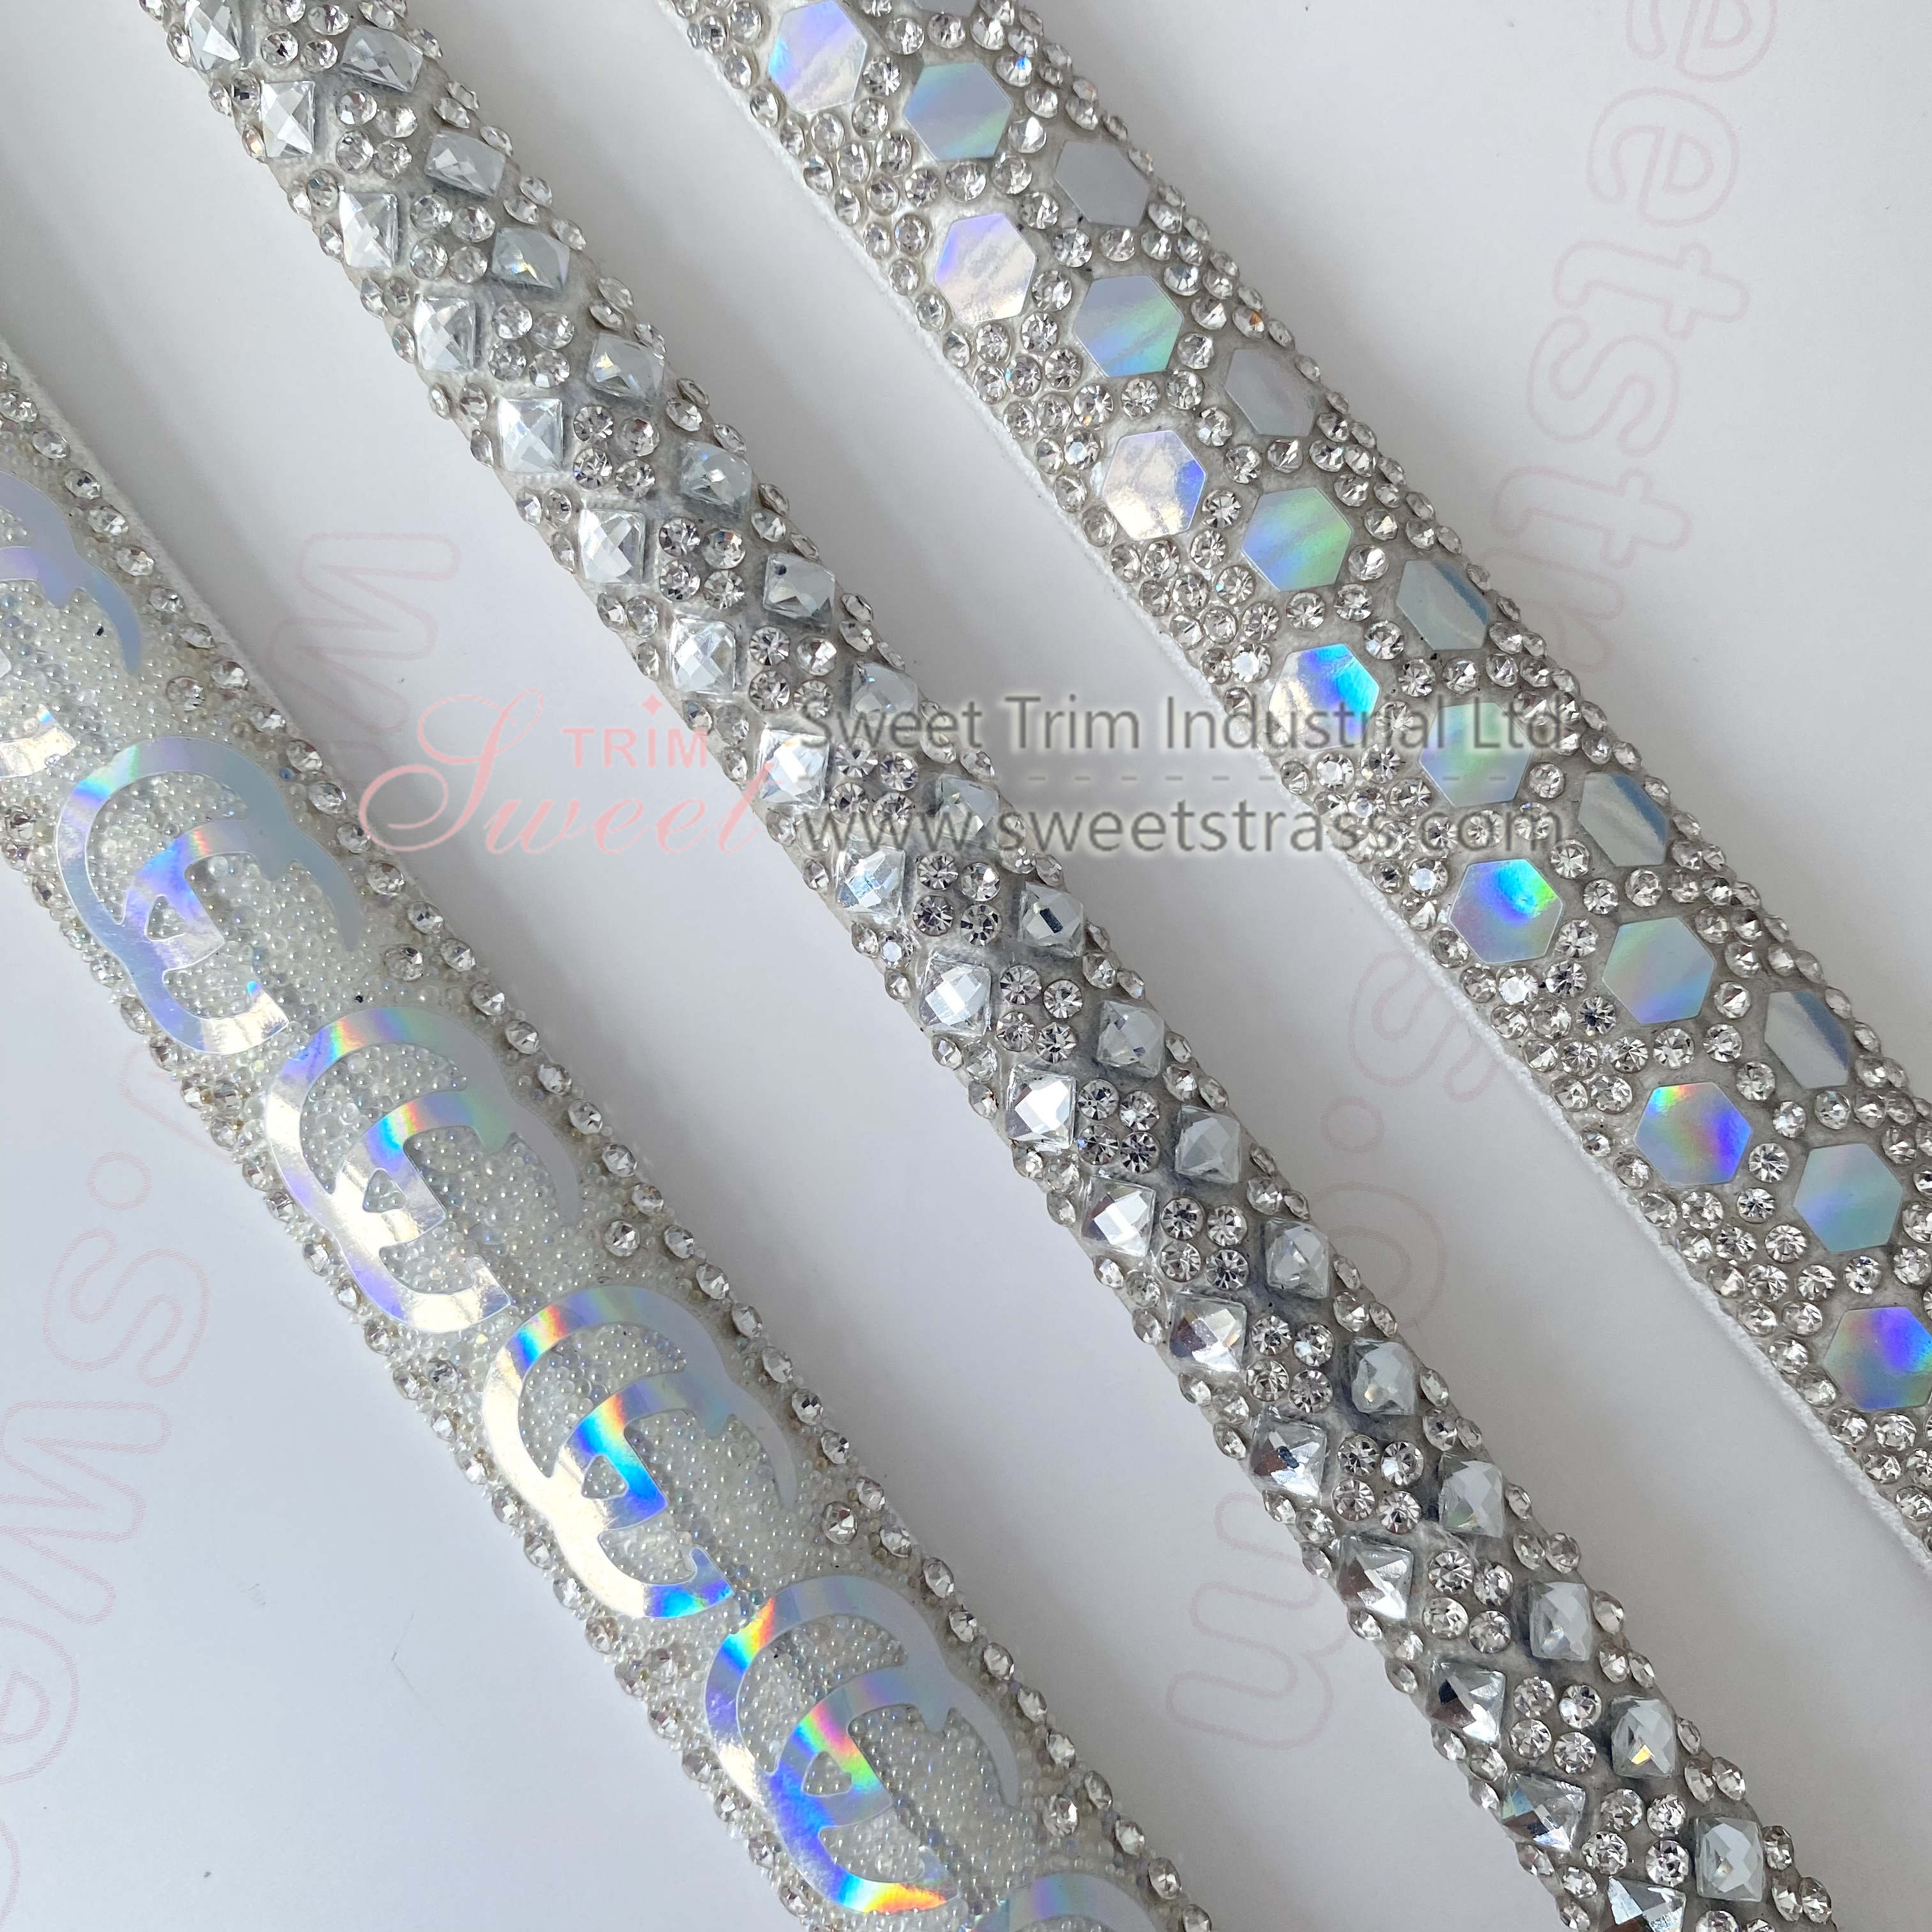 Hot Sell Rhinestone Chain Stripe Rope Shoe Trimming Accessories Half Round Crystal Rope for Bags Clothing Decoration